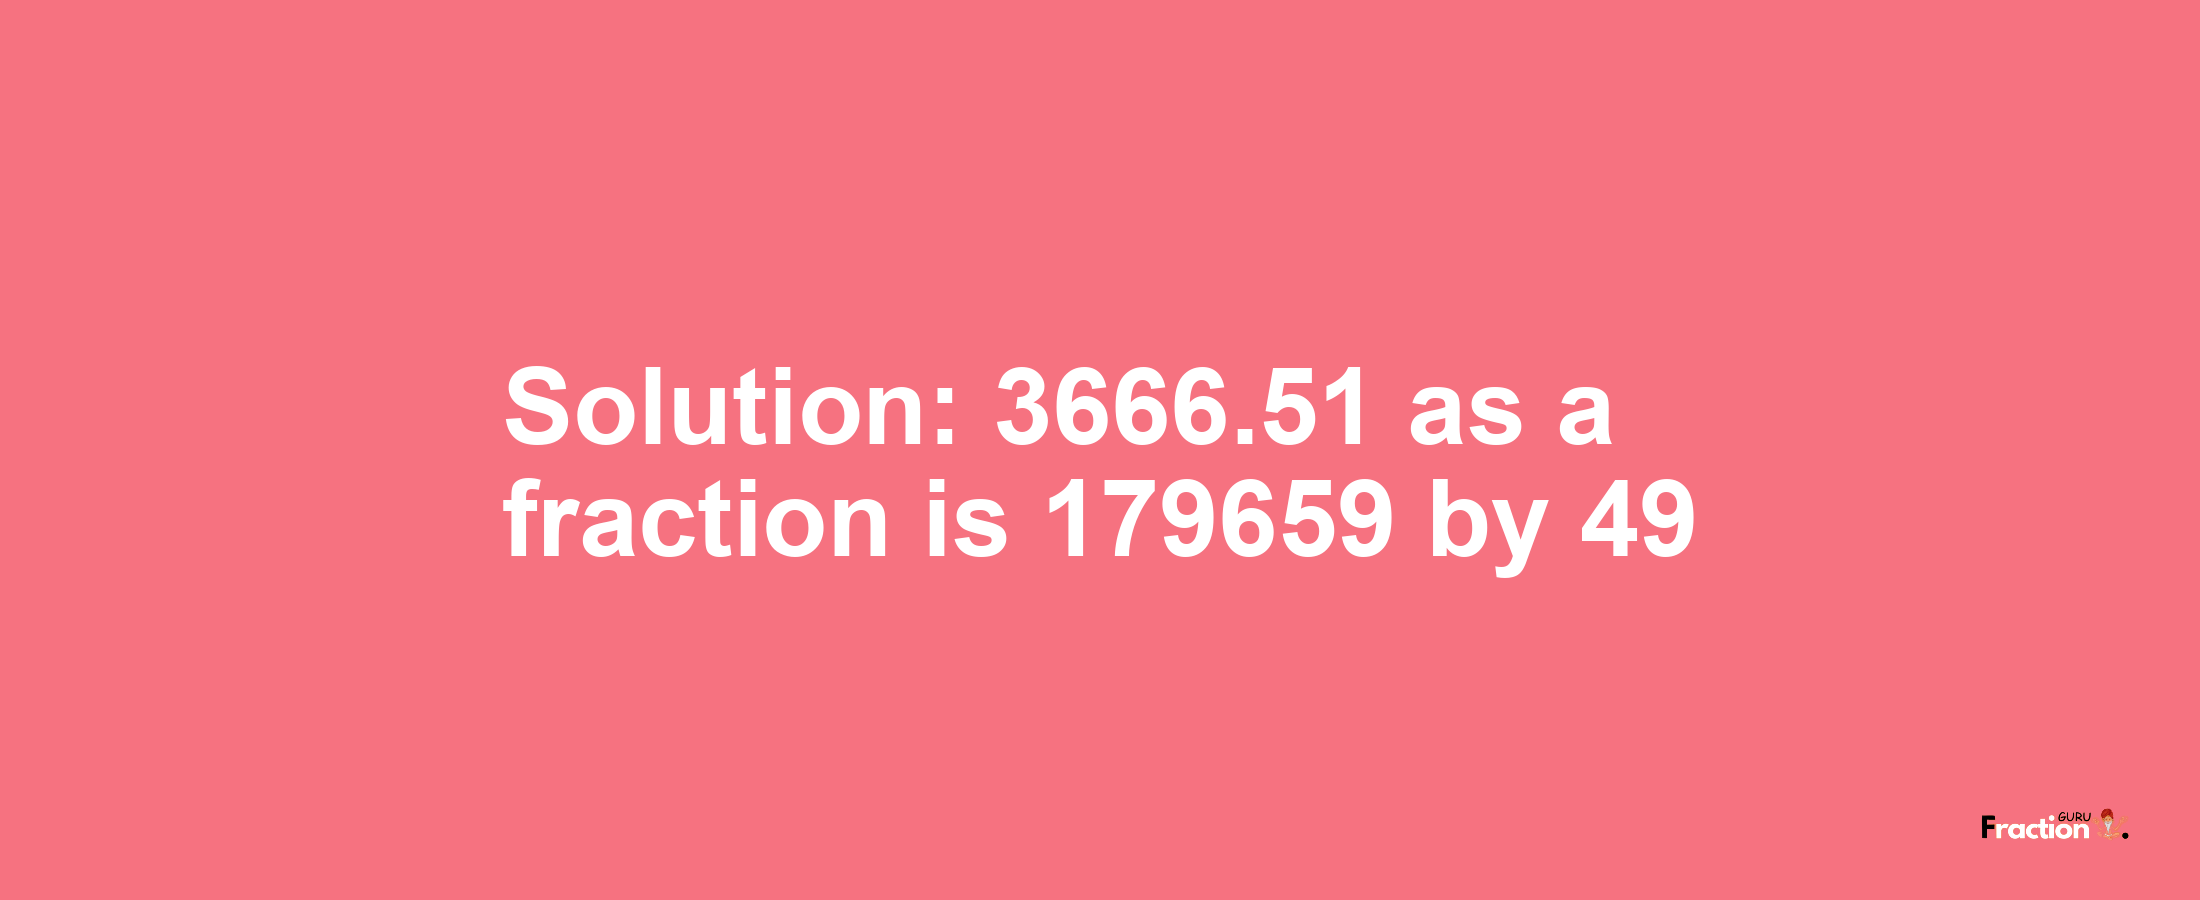 Solution:3666.51 as a fraction is 179659/49